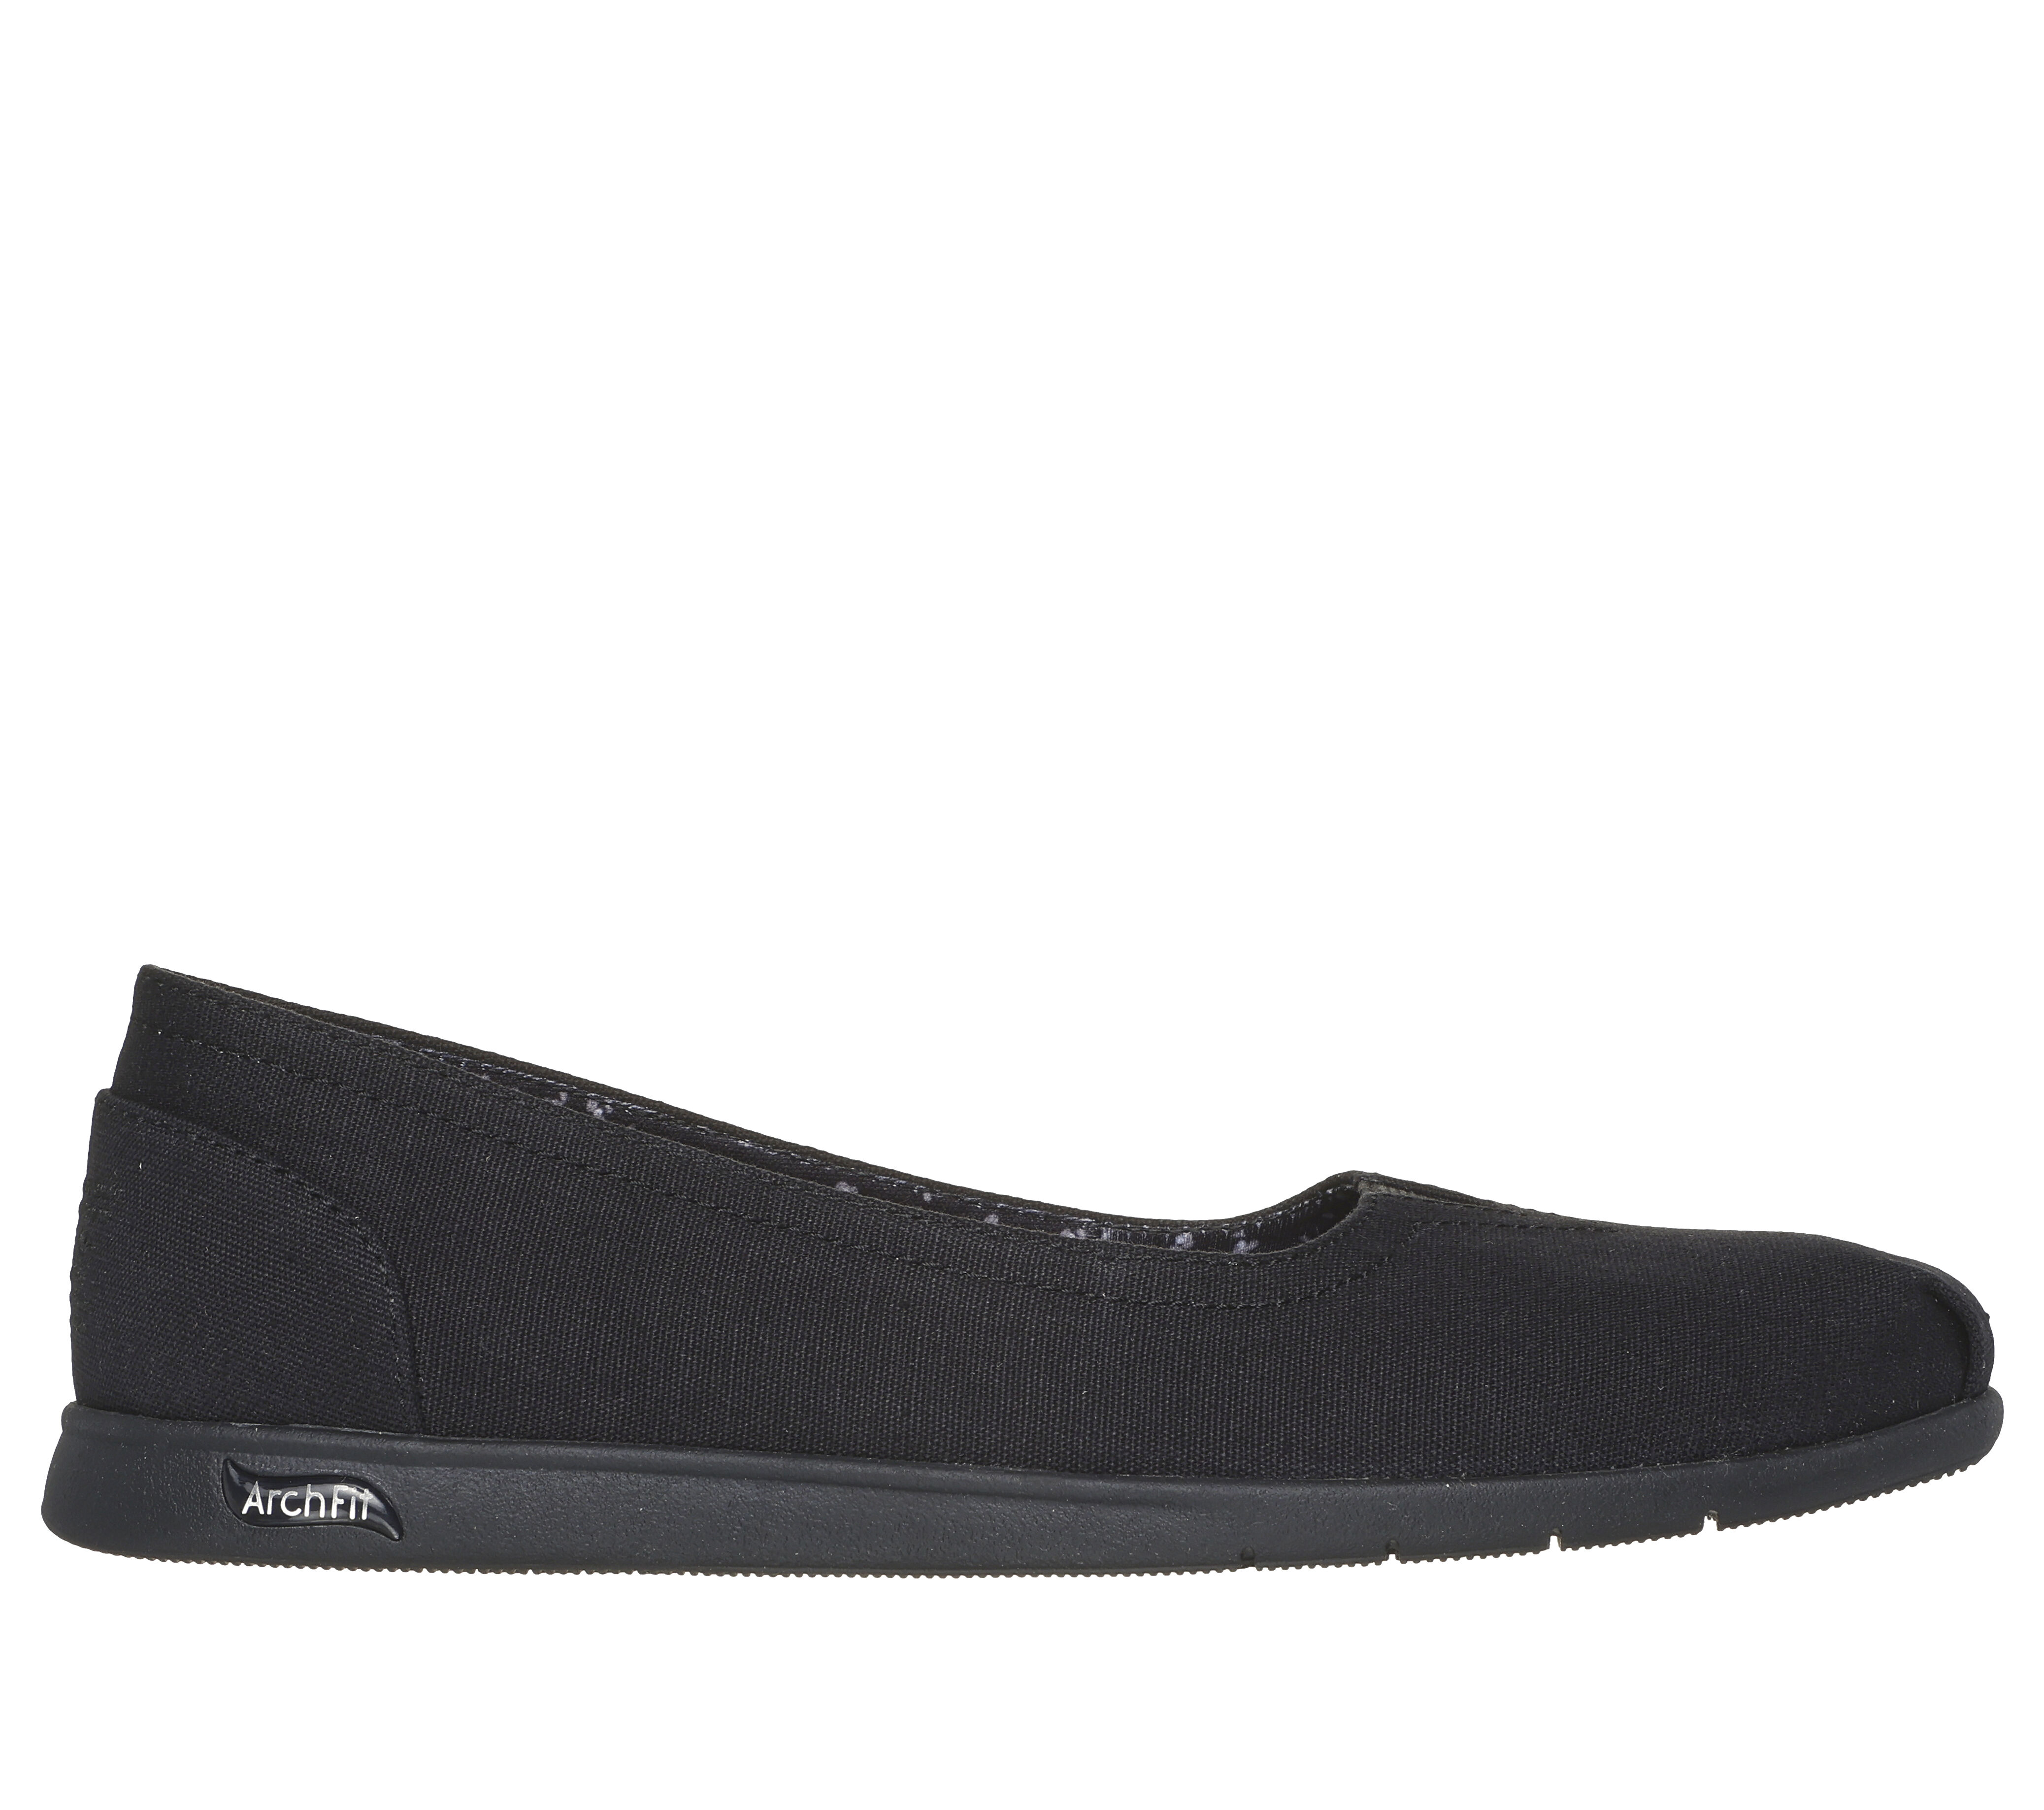 Shop the BOBS Arch Fit Plush - By The Way | SKECHERS CA